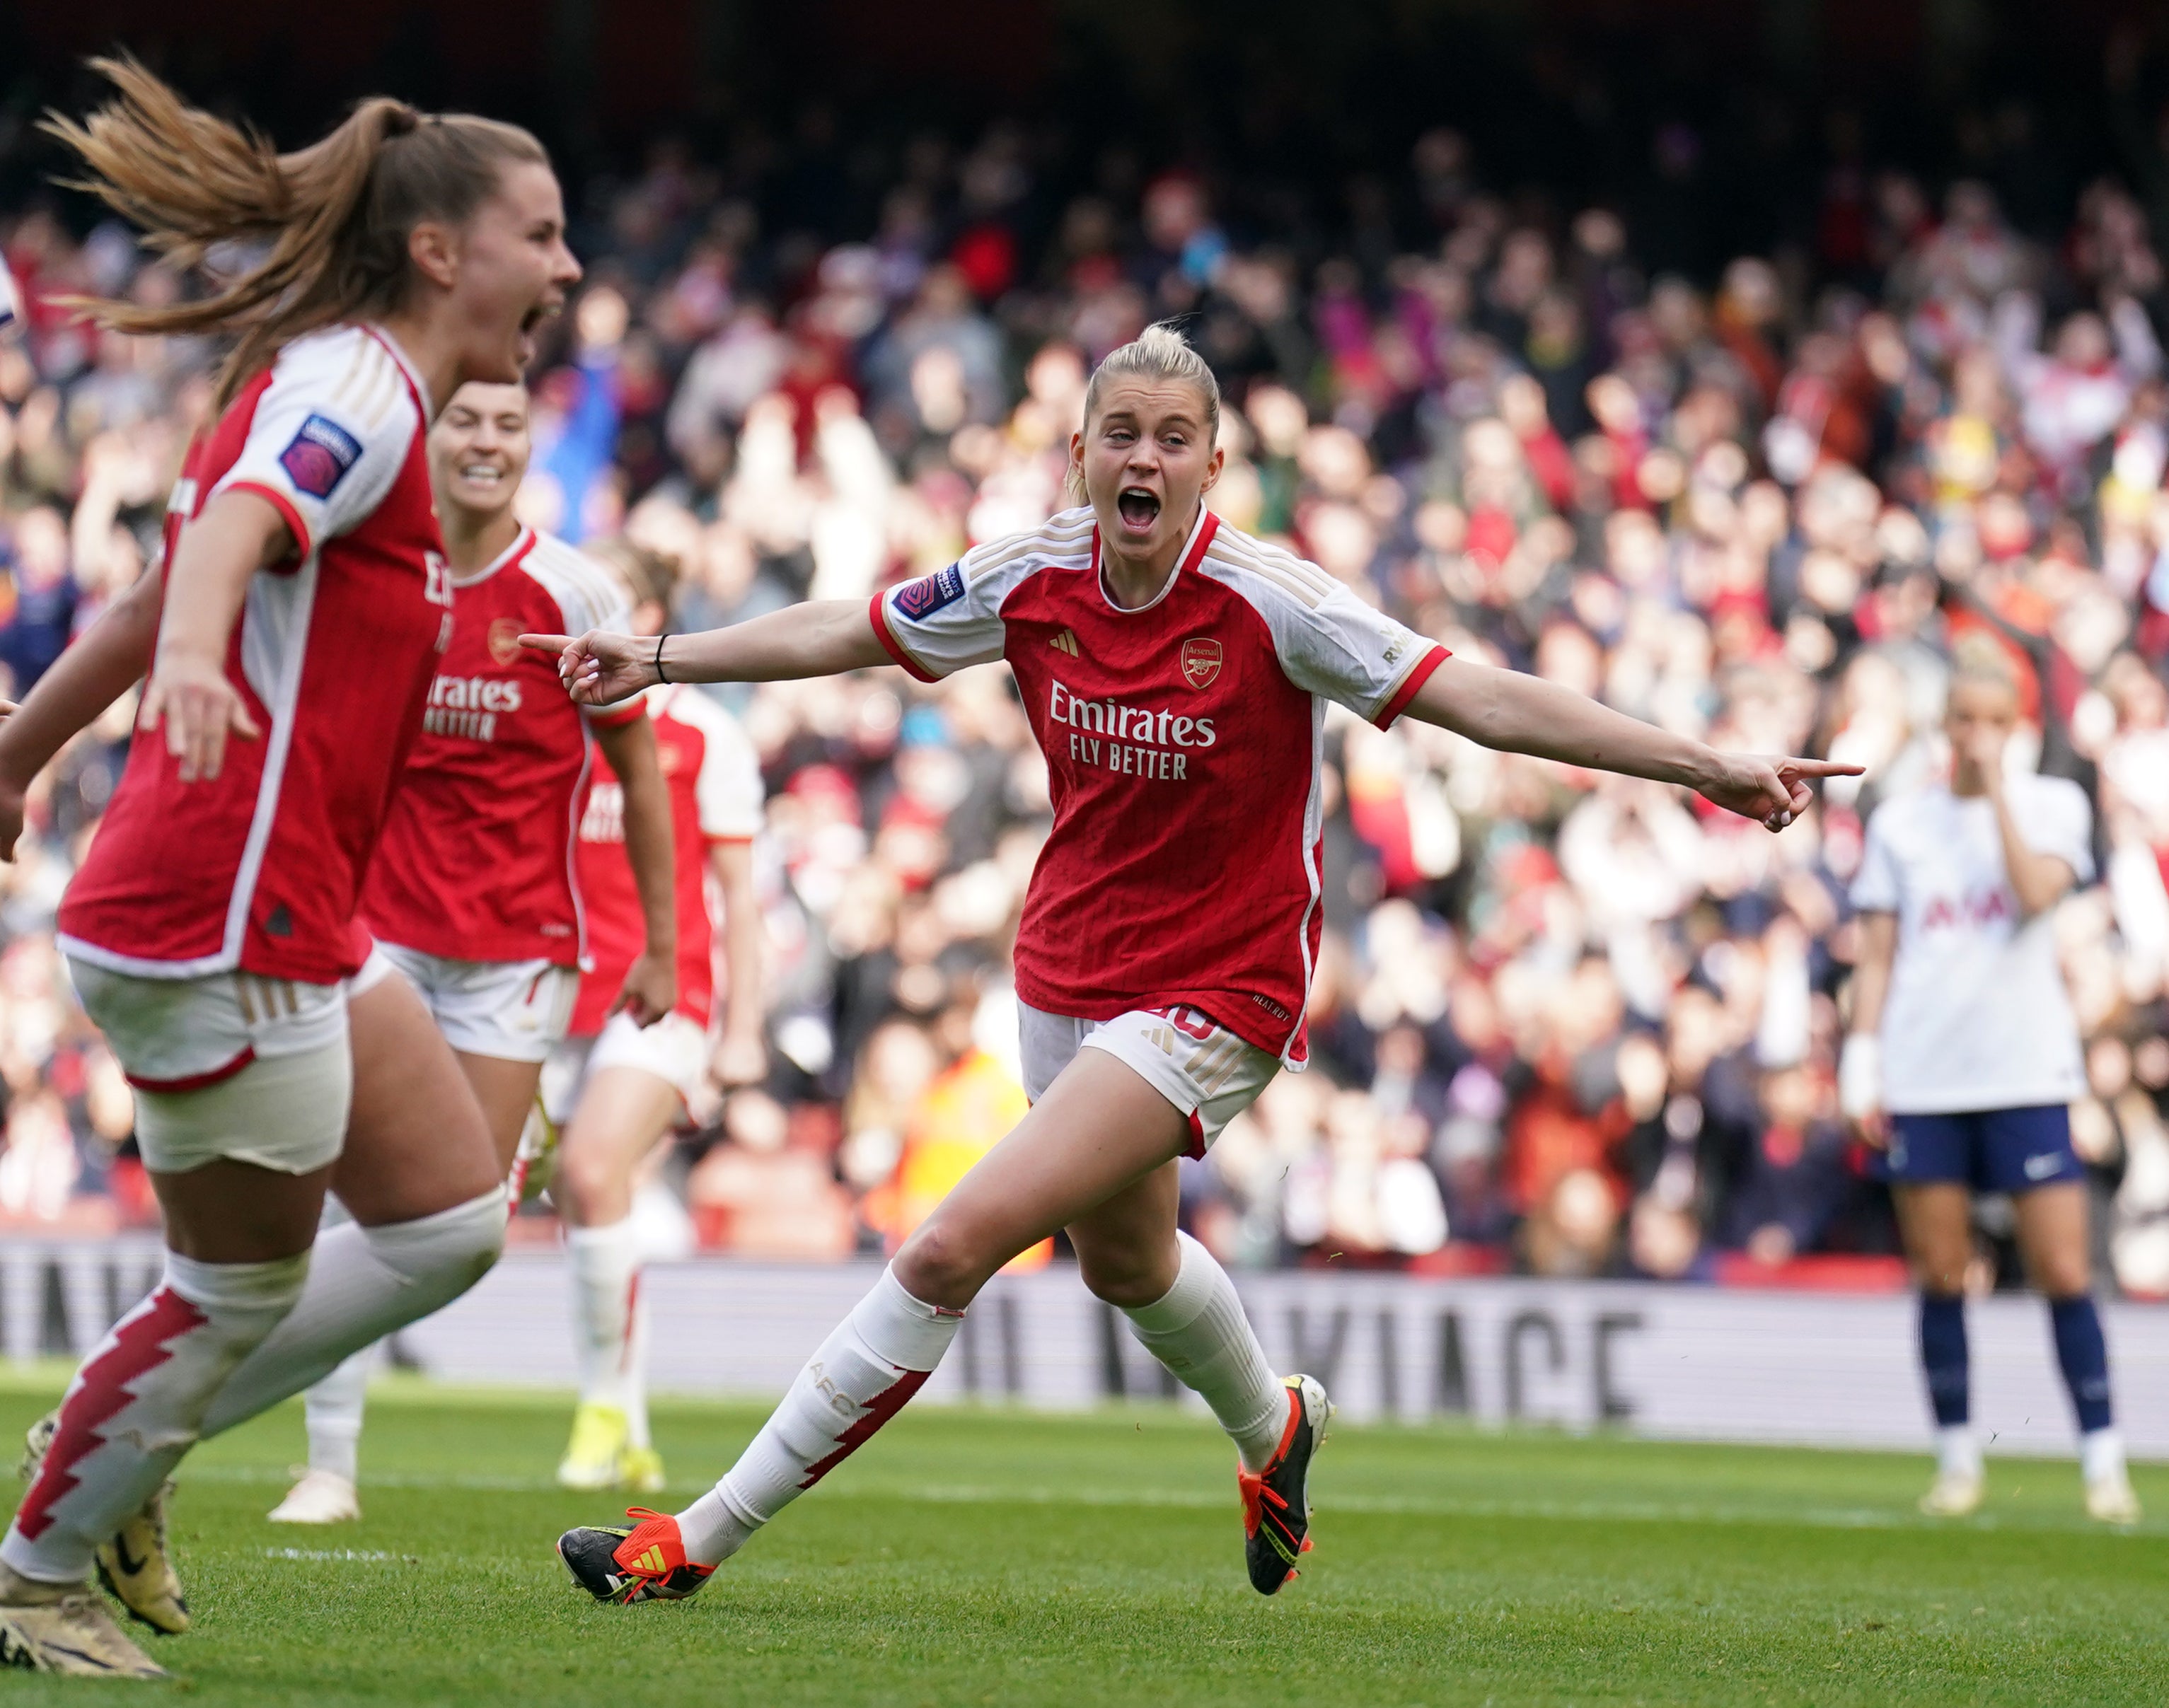 Arsenal's Alessia Russo celebrates scoring the only goal of the game